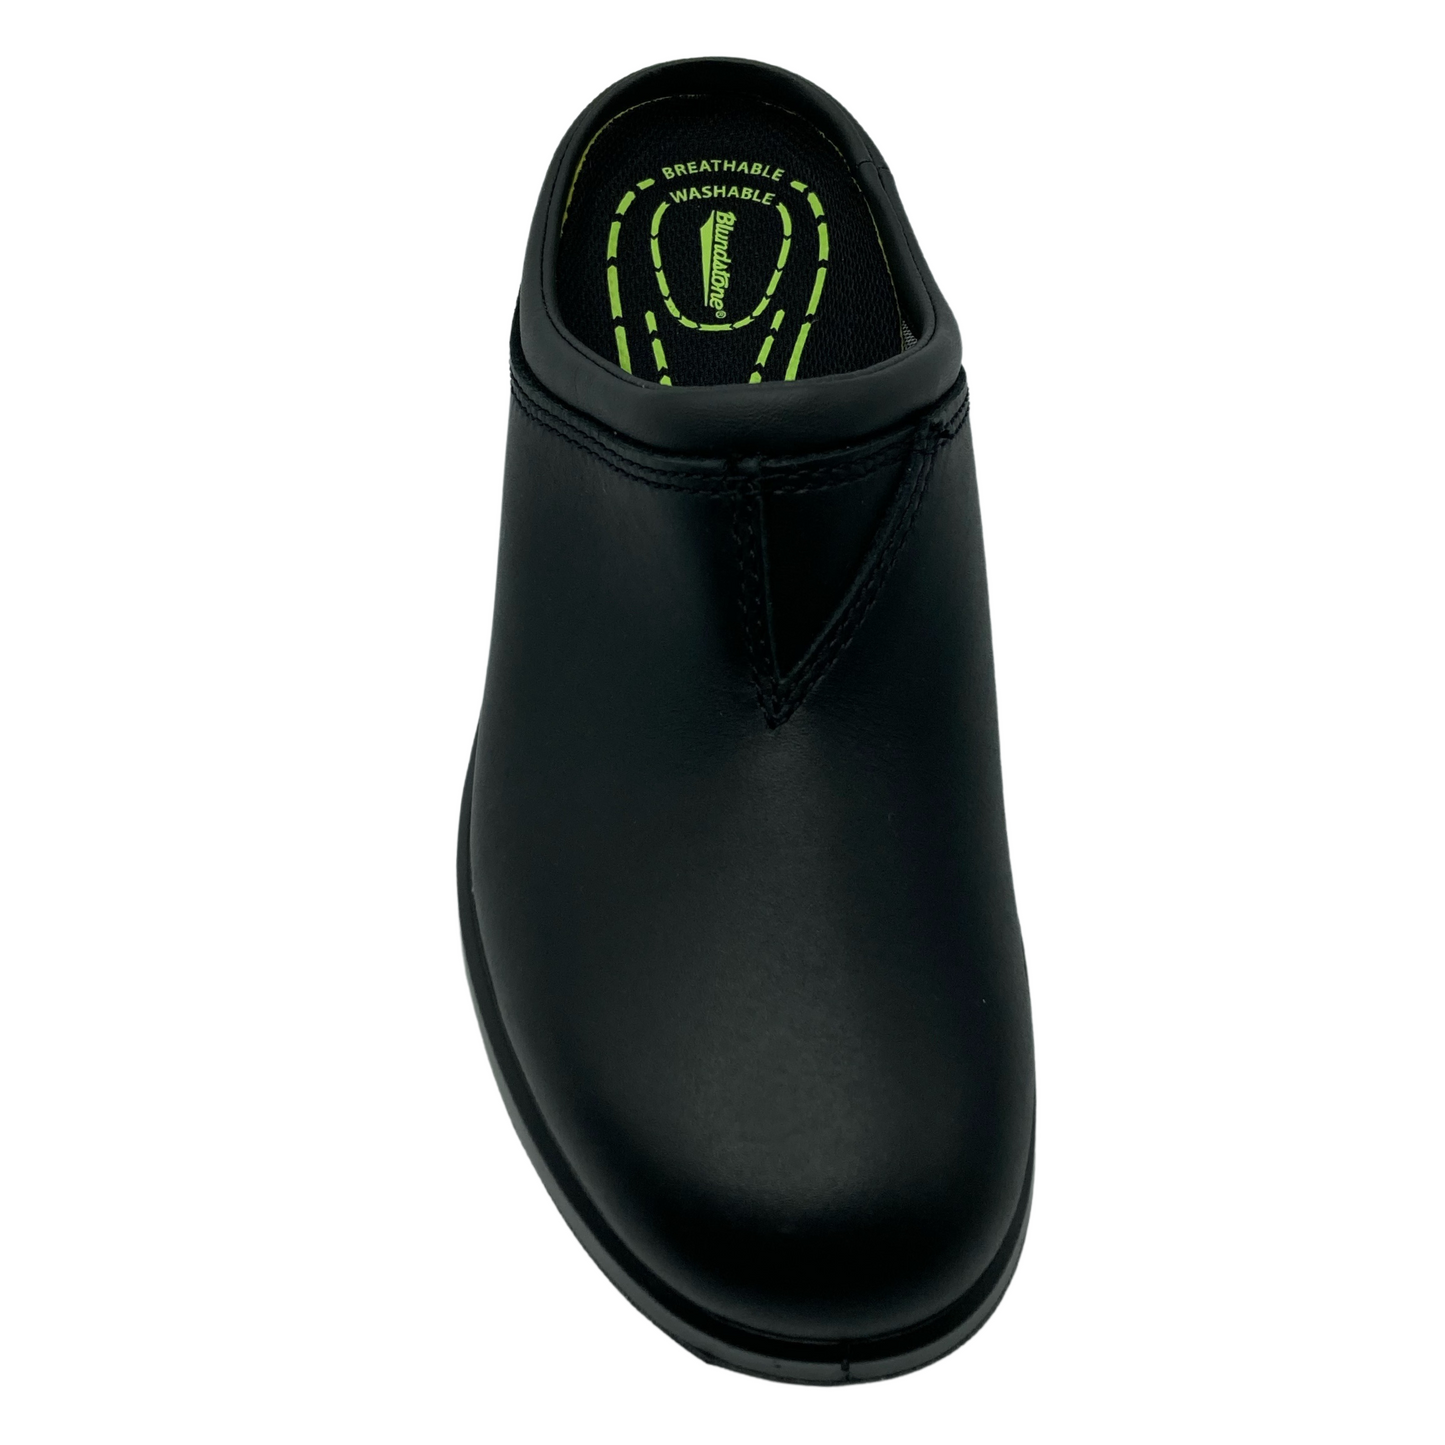 Top view of black leather clog with black lining and lime green writing on insole